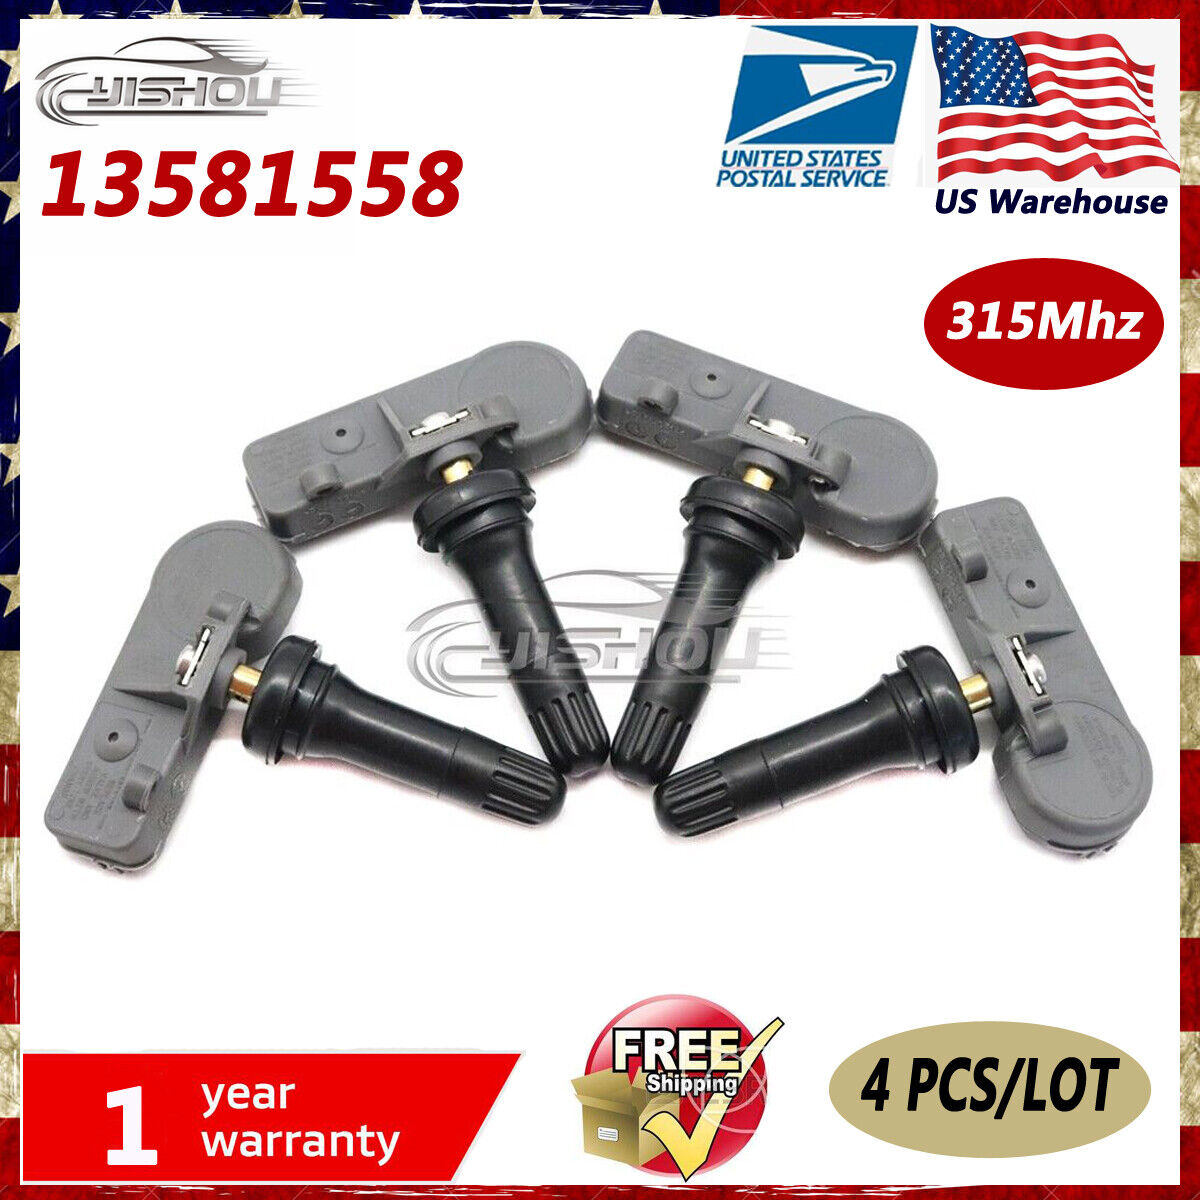 4PC NEW TPMS Tire Pressure Sensor 315Mhz For GM Chevy GMC Sierra Buick 13581558